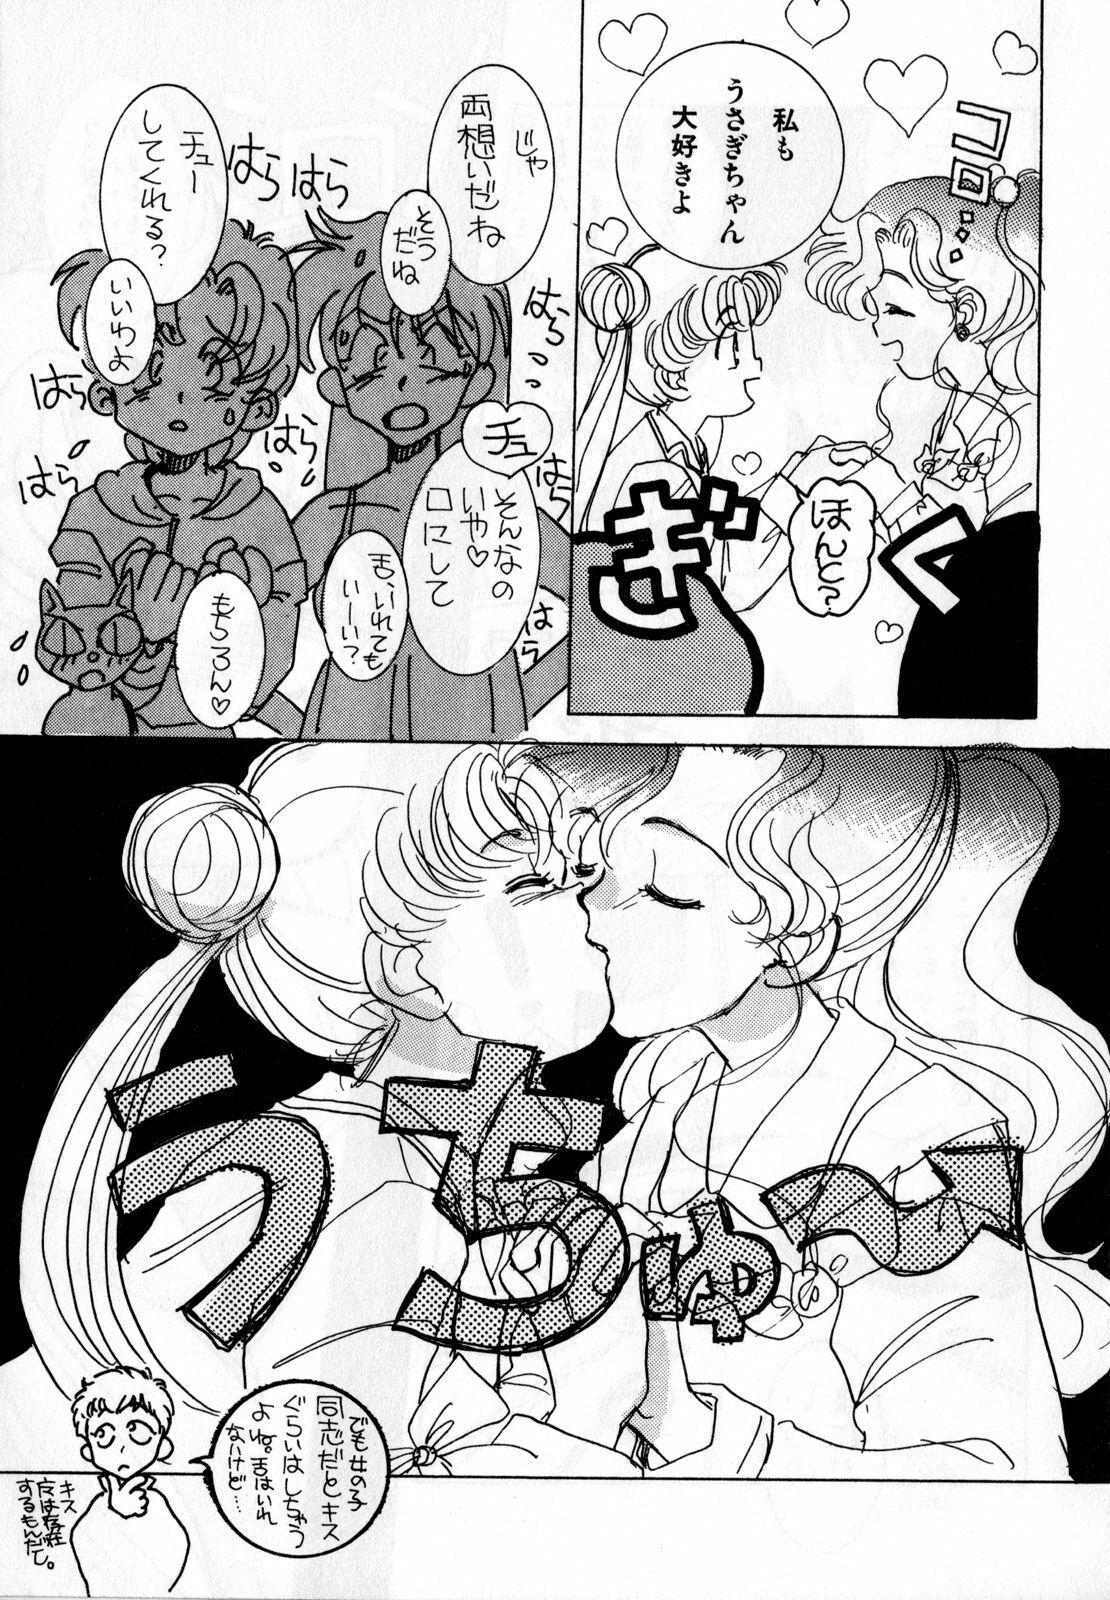 [Anthology] Lunatic Party 1 (Sailor Moon) page 34 full